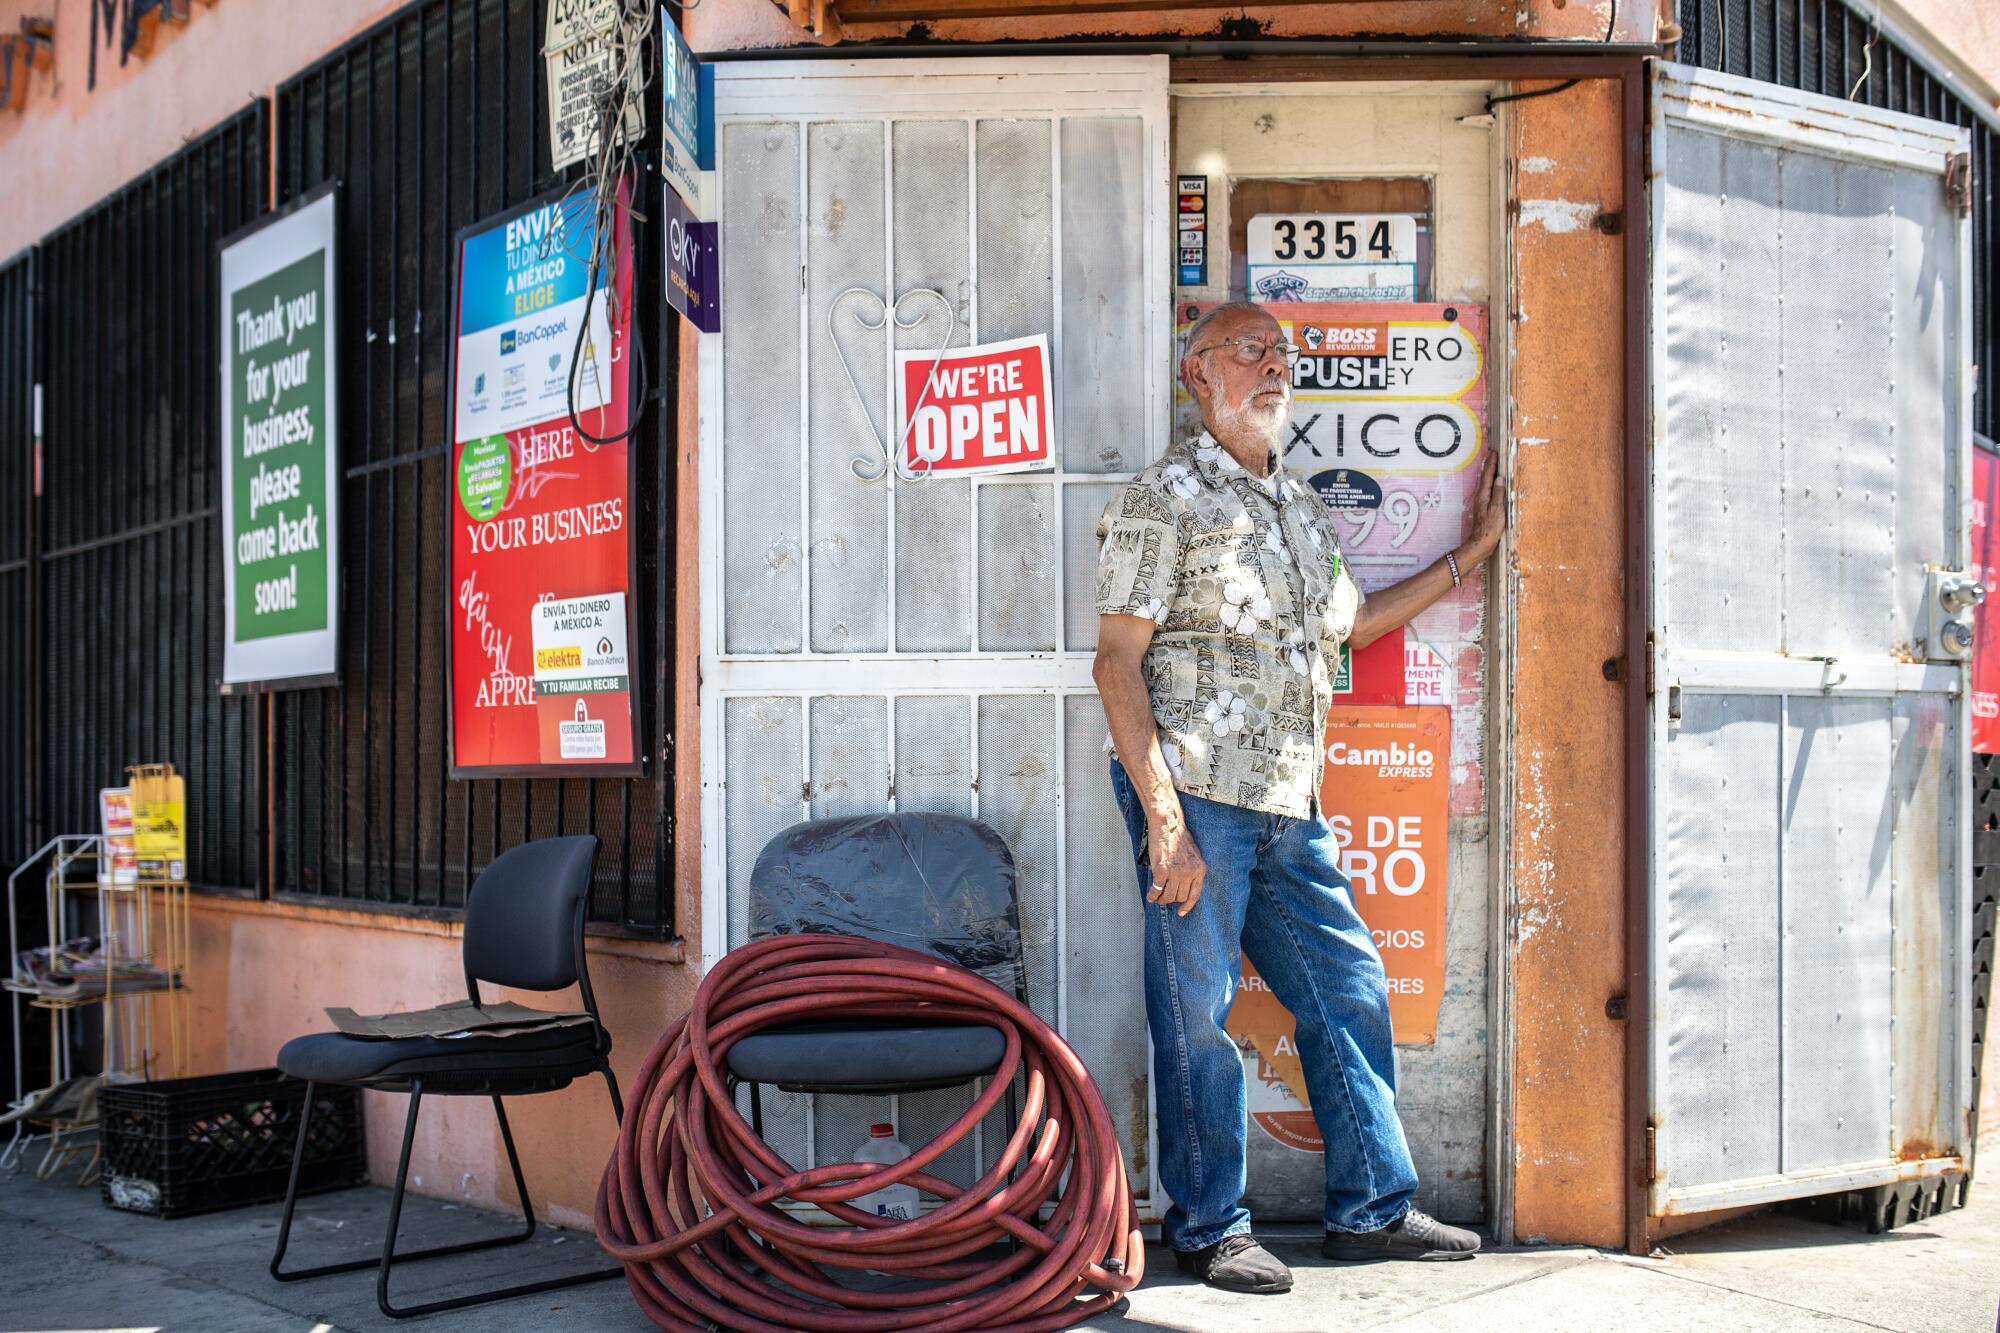 A man stands in front of a store with a "We're open" sign on its door.